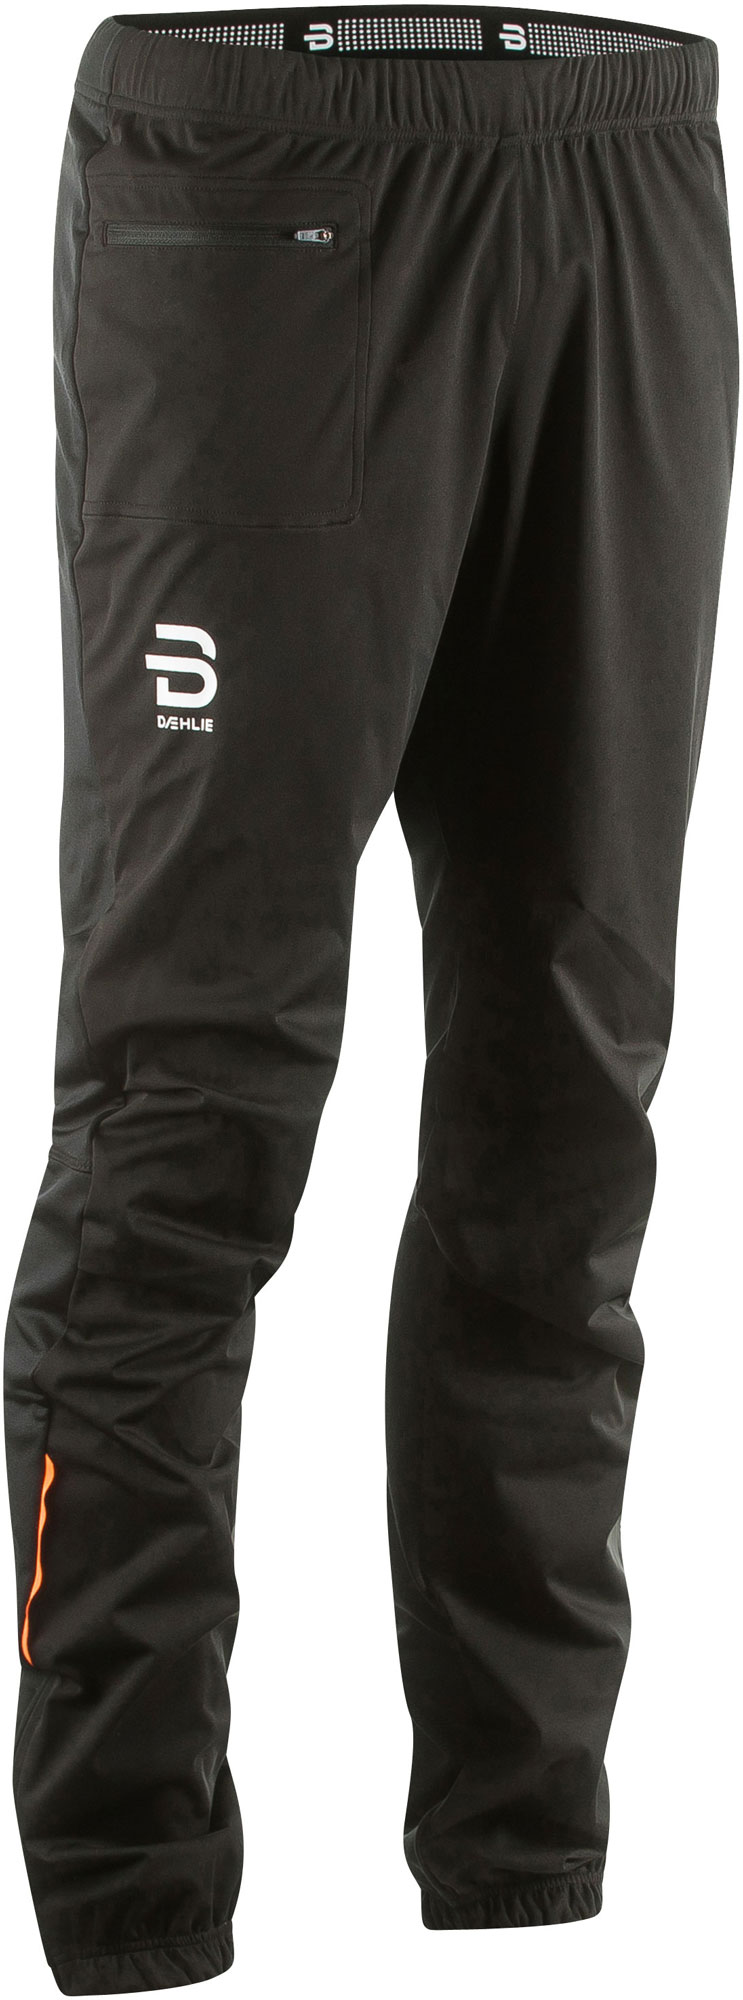 Functional sports pants